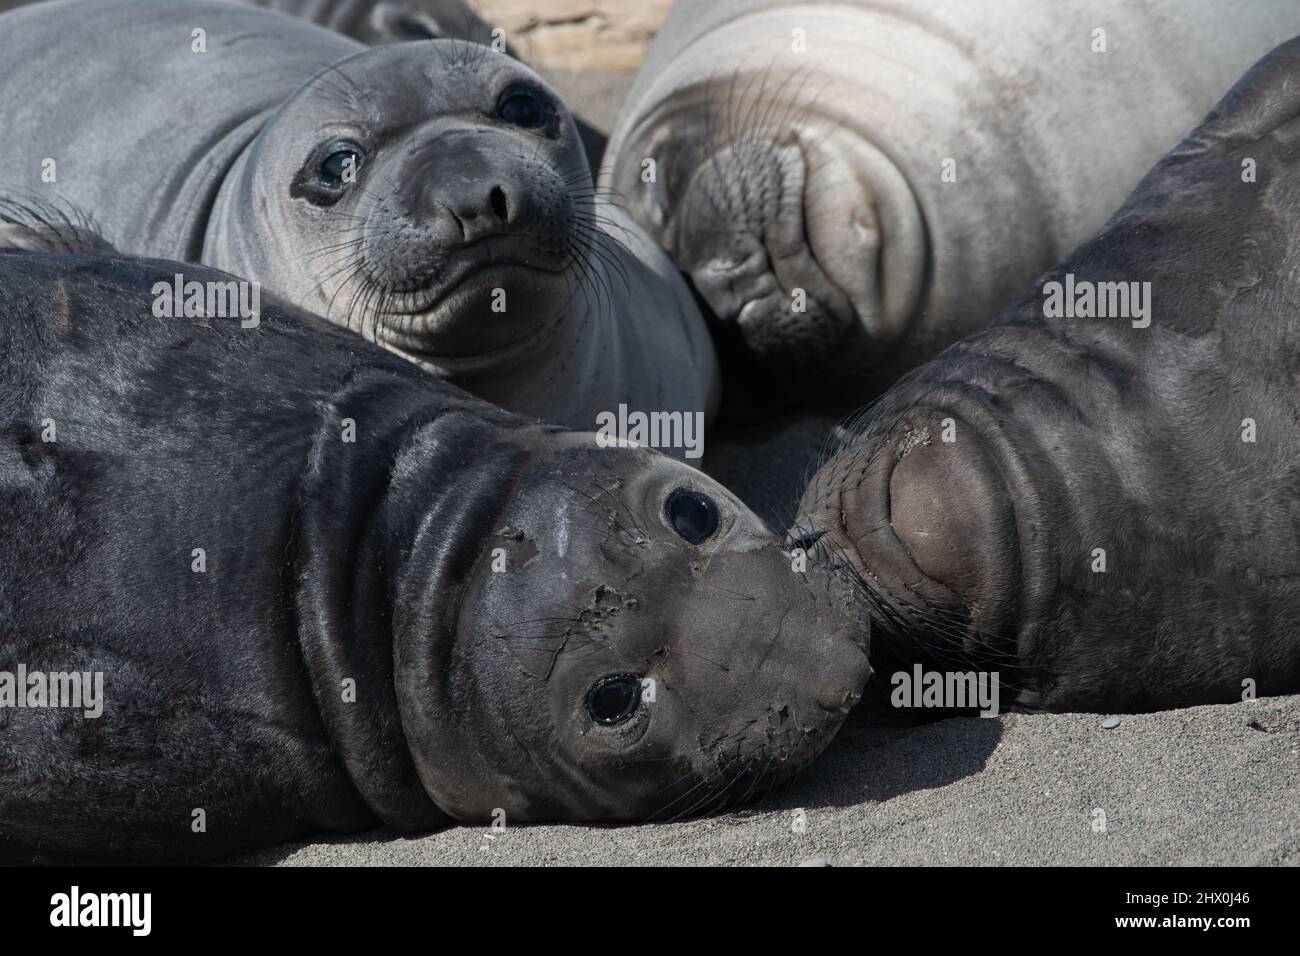 Sleeping northern elephant seal (Mirounga angustirostris) pups, recently weaned and left on the beach by their mothers they form a weaner pod. Stock Photo